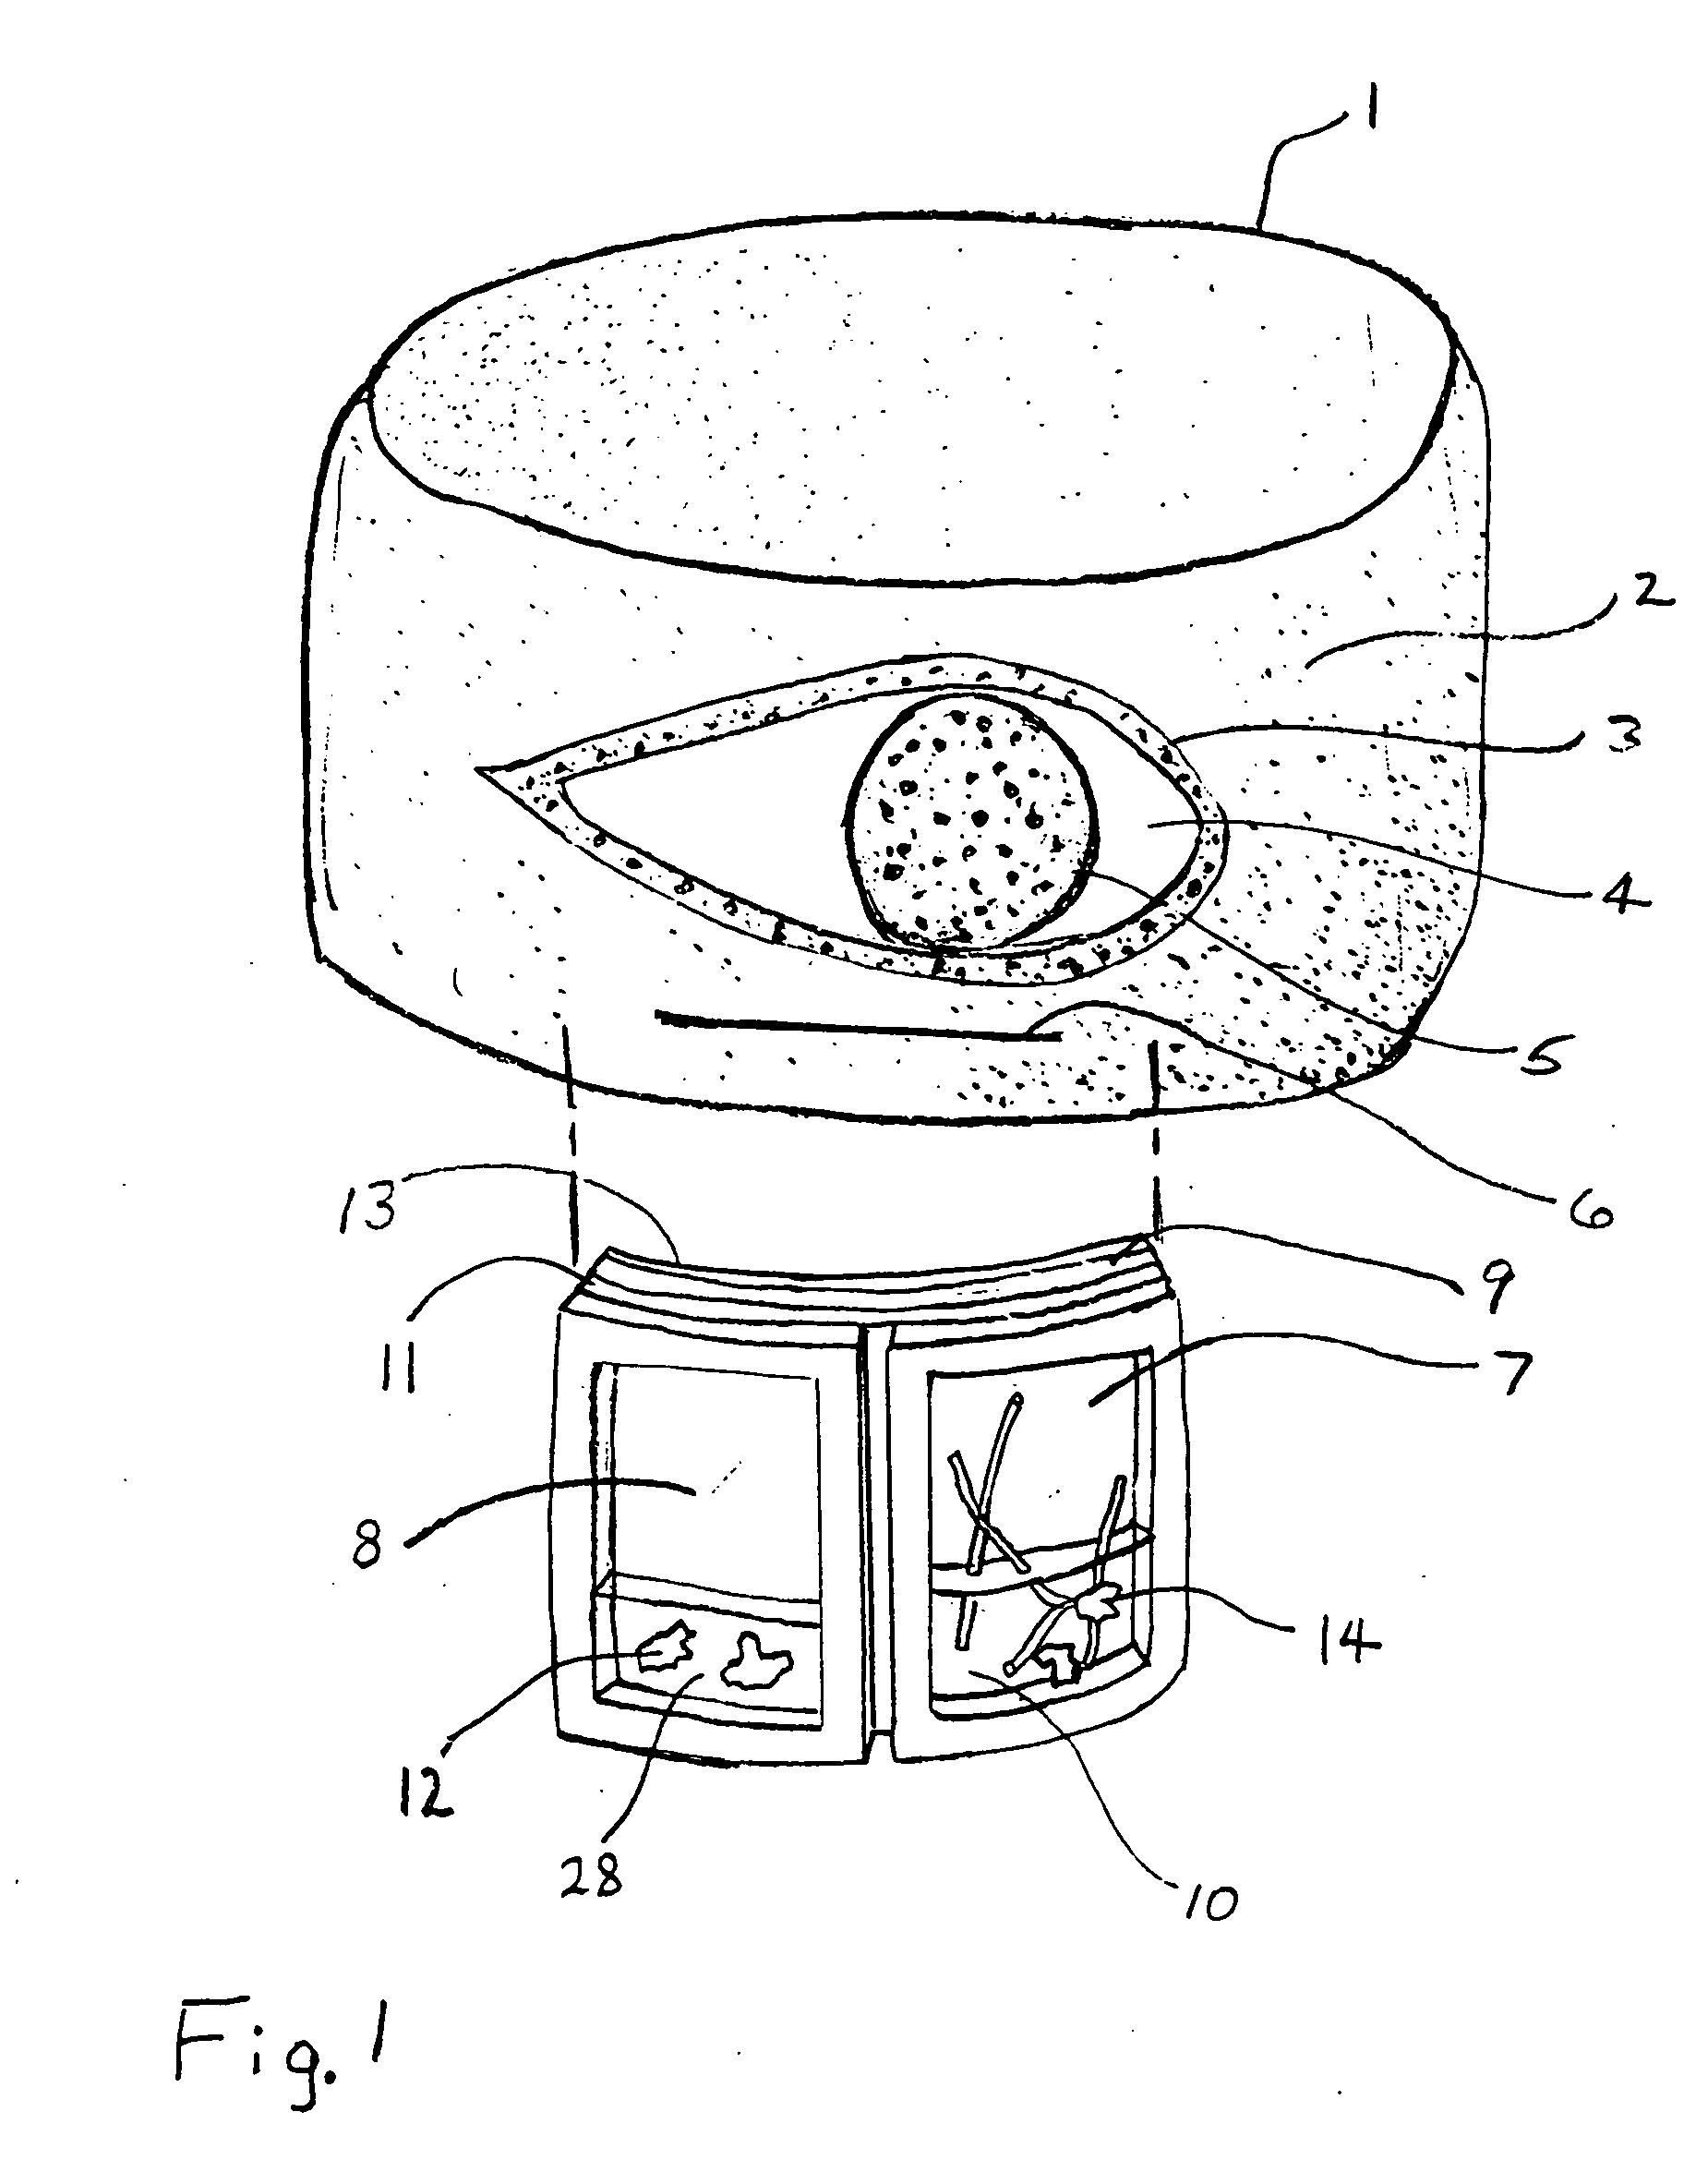 Insect repellent and attractant and auto-thermostatic membrane vapor control delivery system